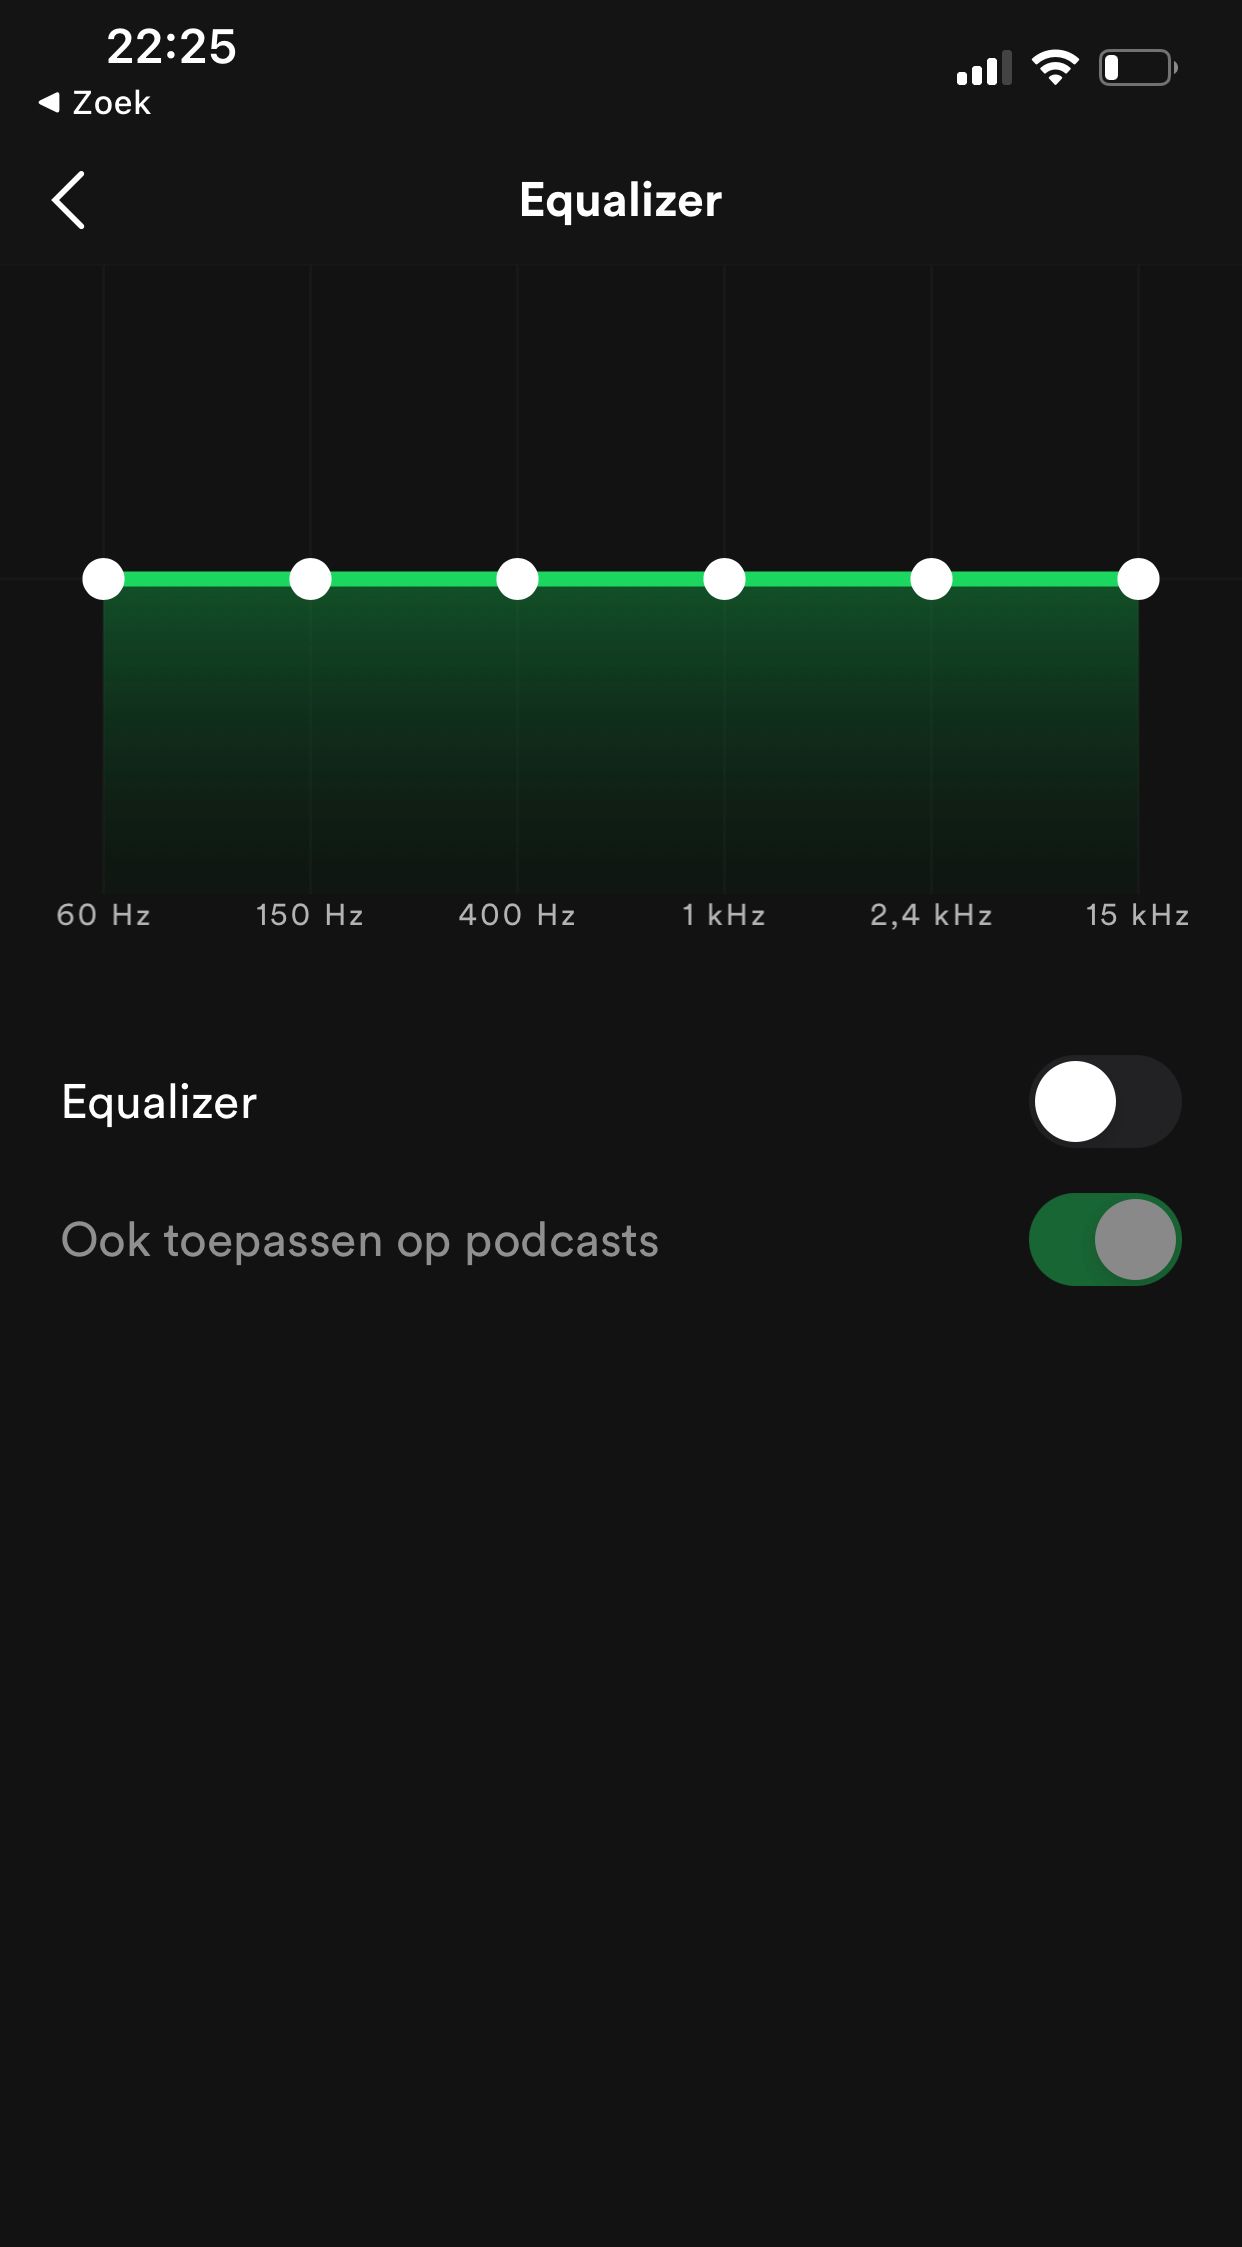 iOS] Equalizer presets missing - The Spotify Community